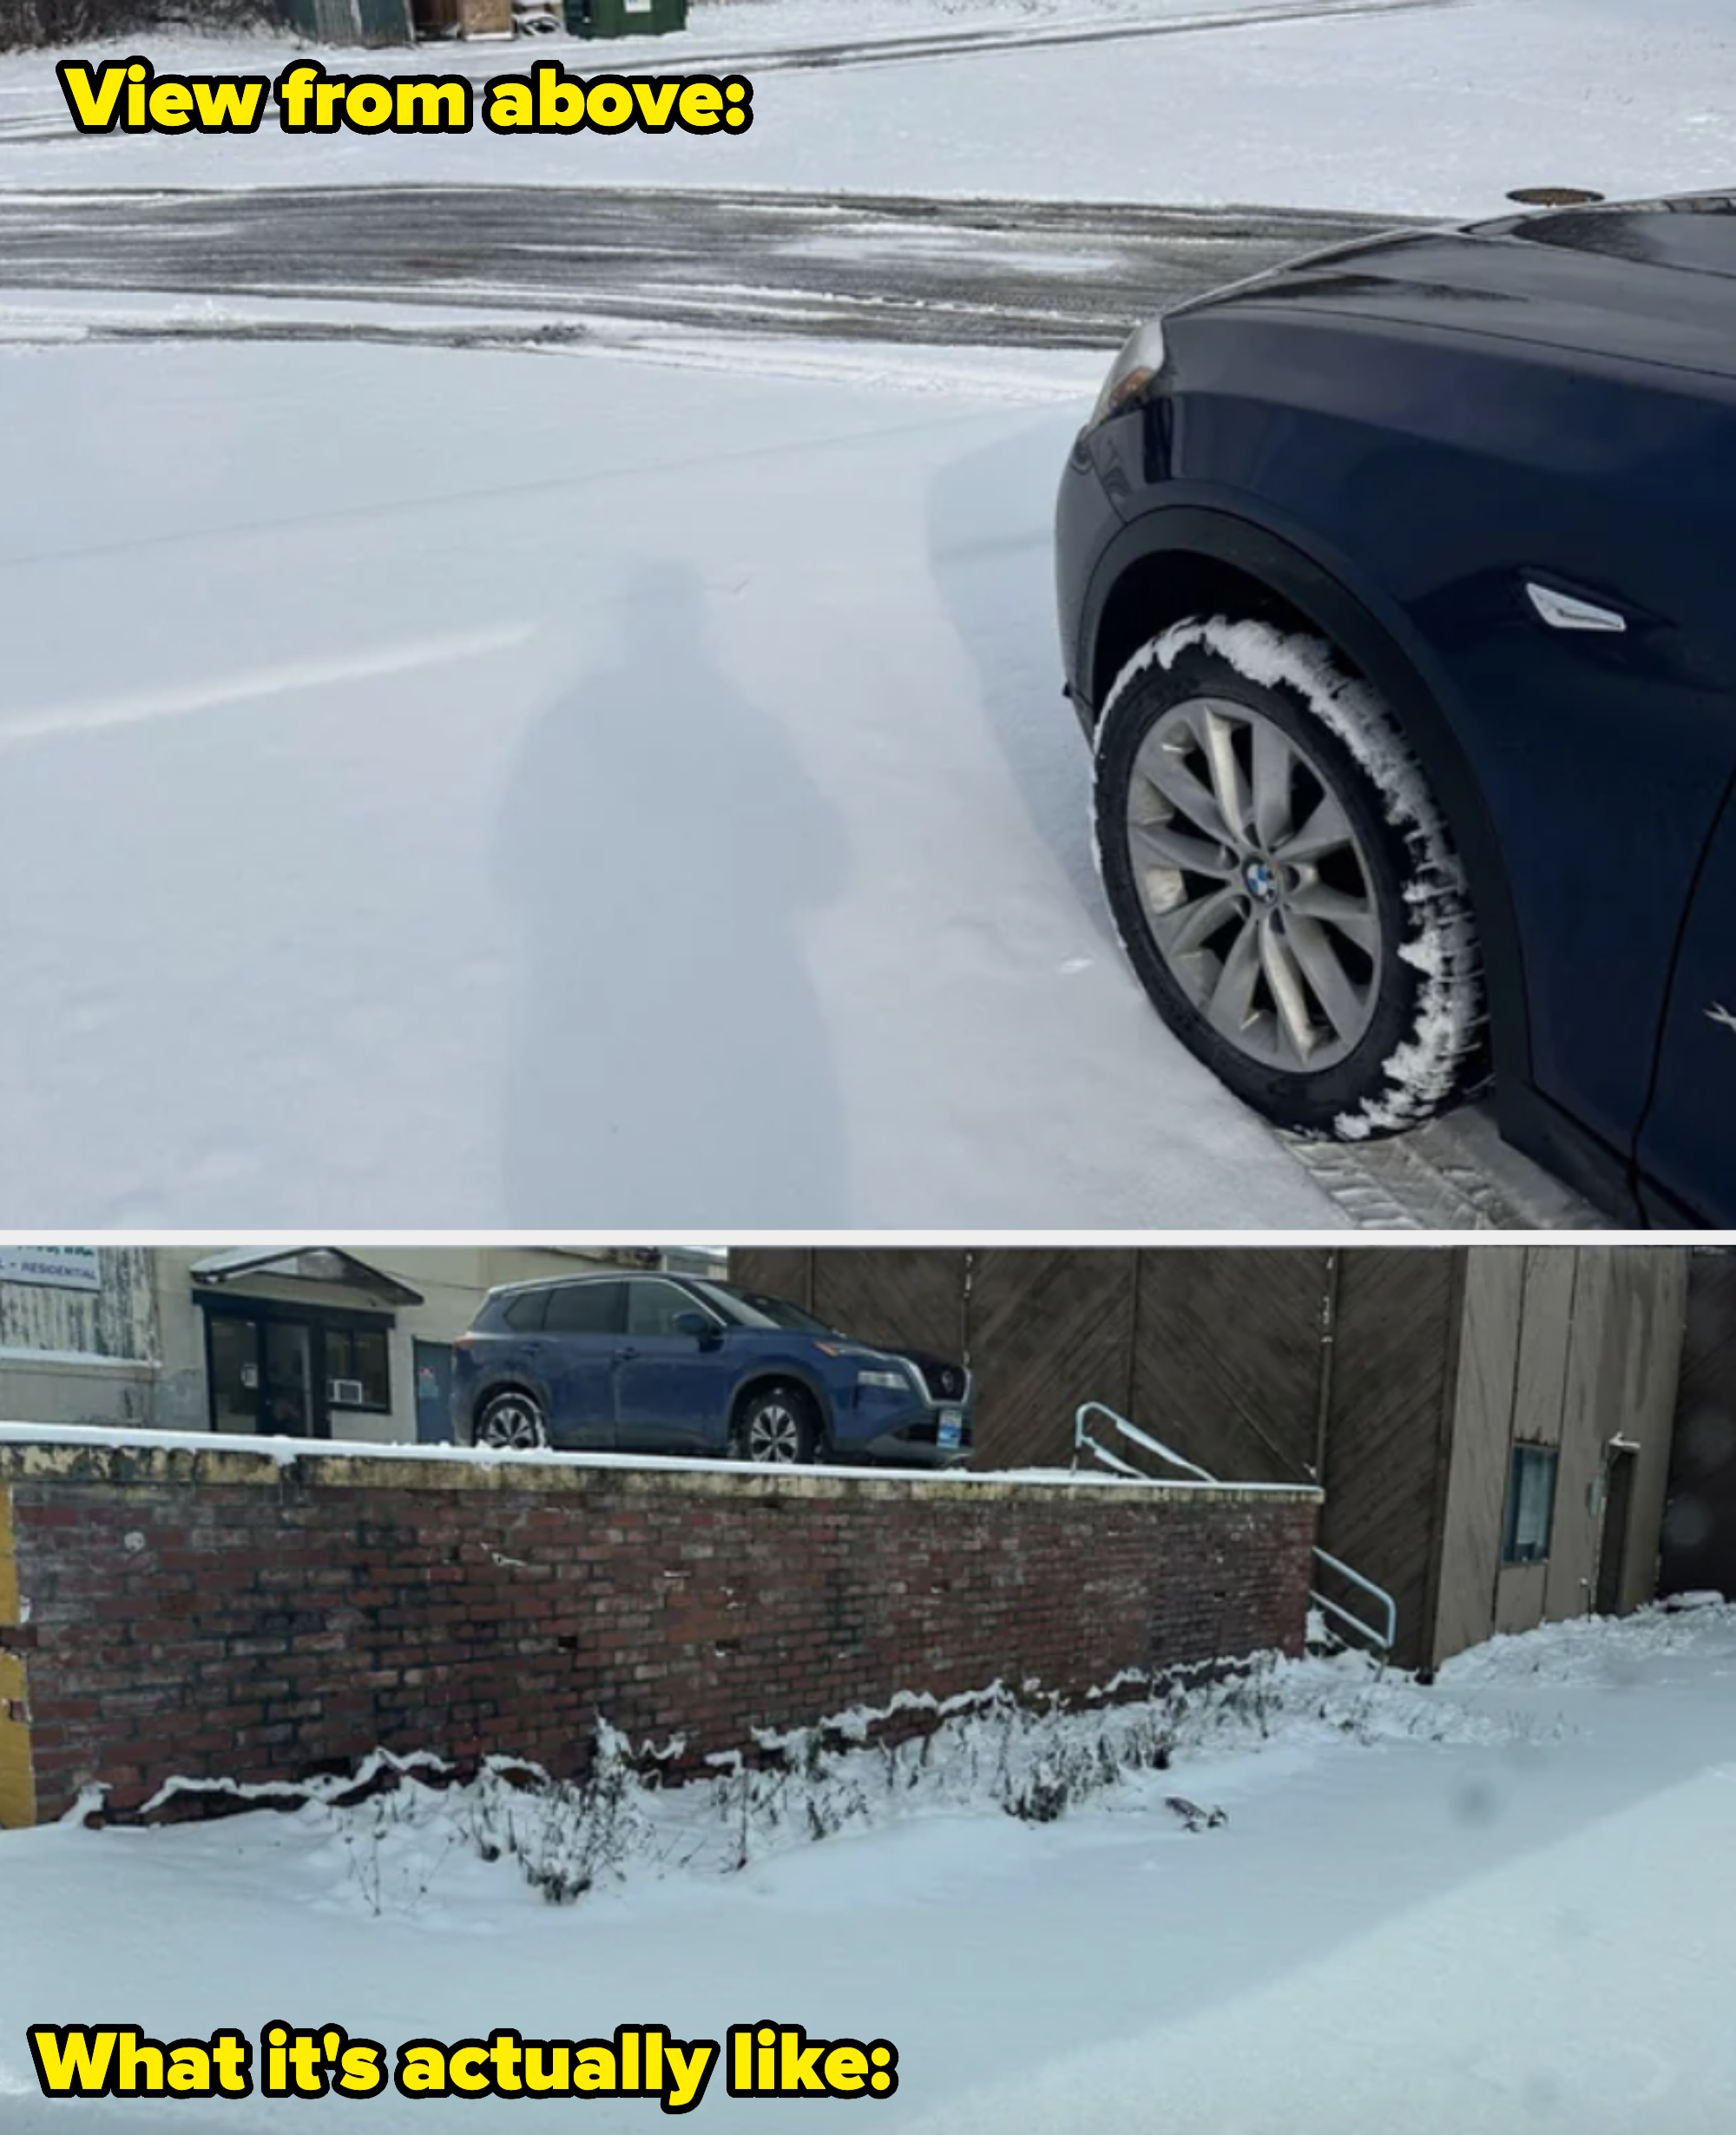 A snowy parking space at a dock with a drop-off that&#x27;s not visible from the top